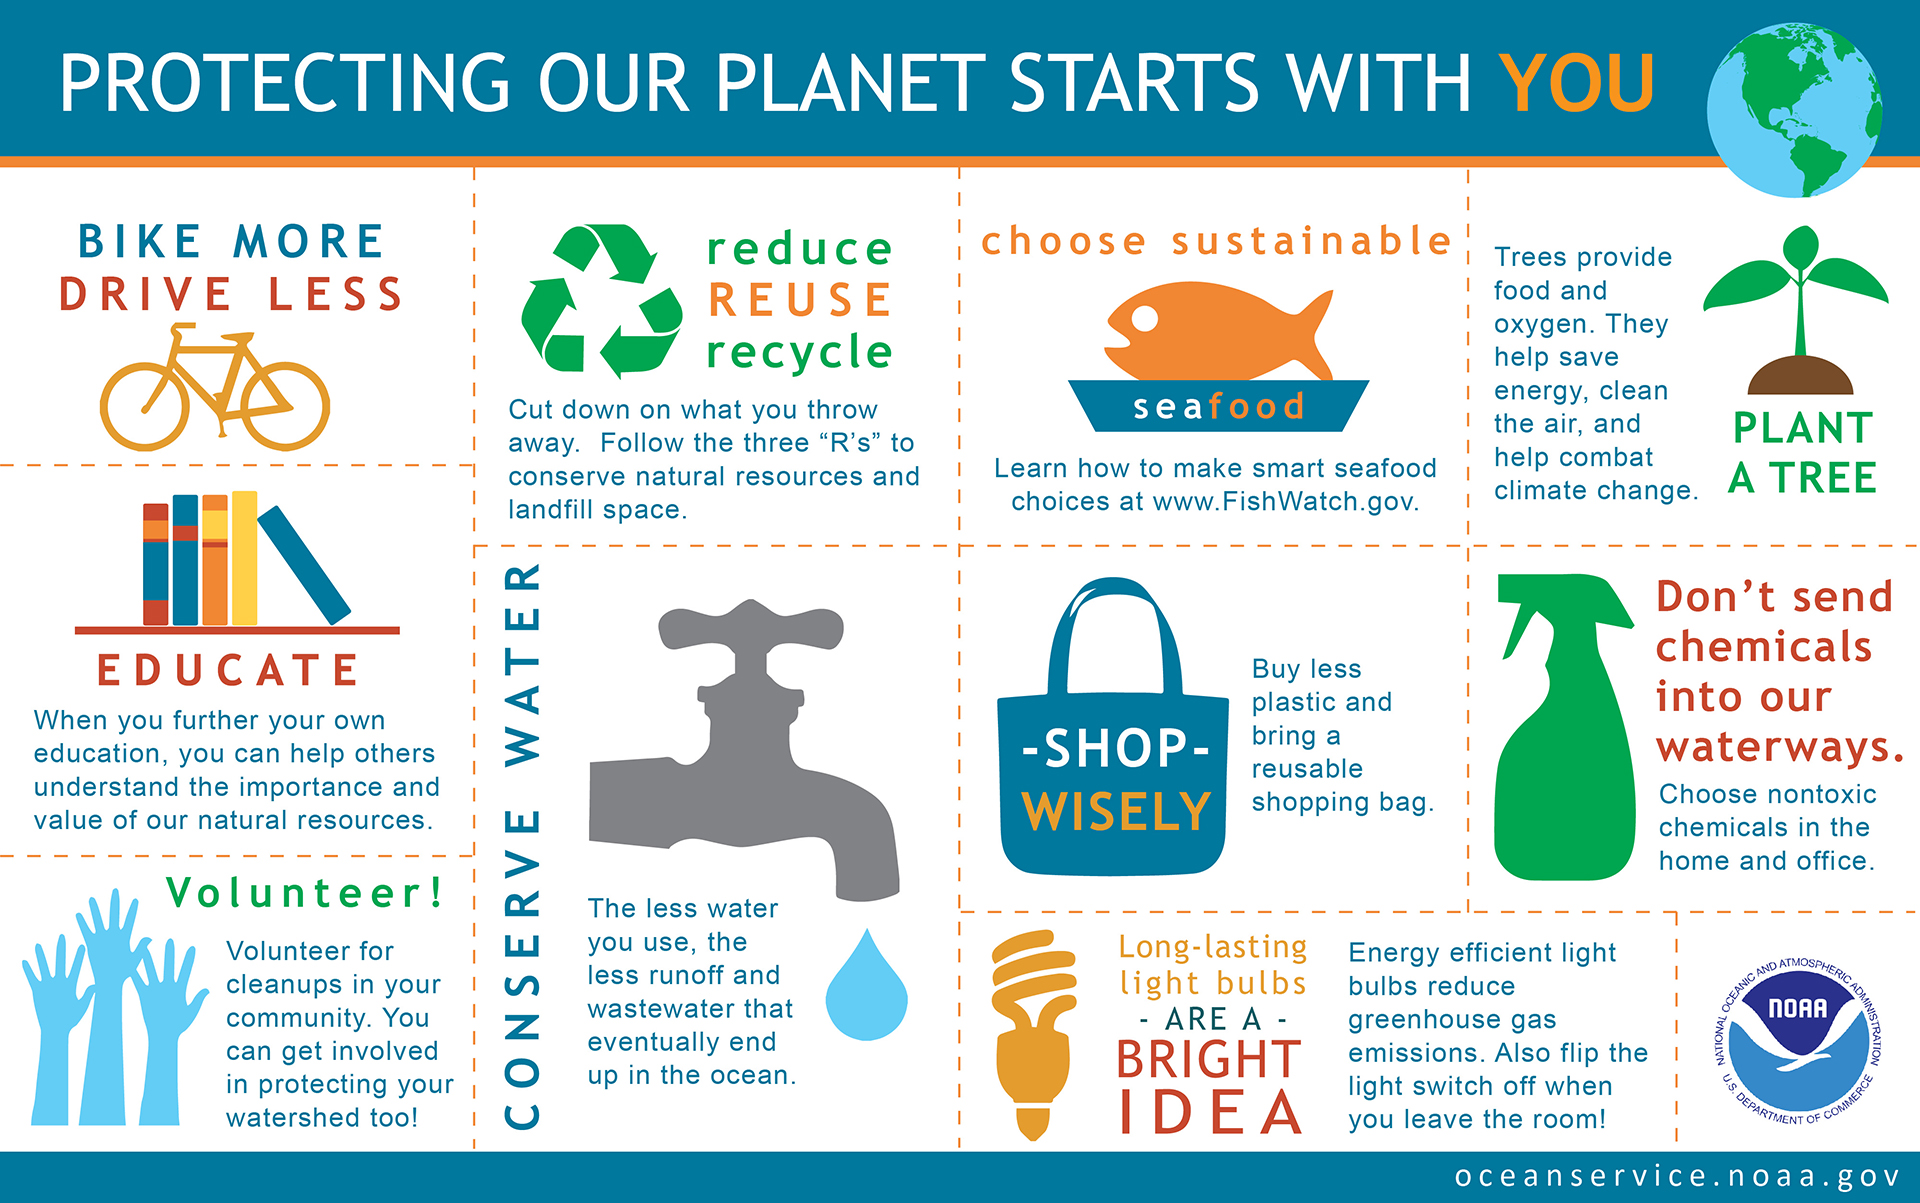 Why should we take care of our earth and environment?